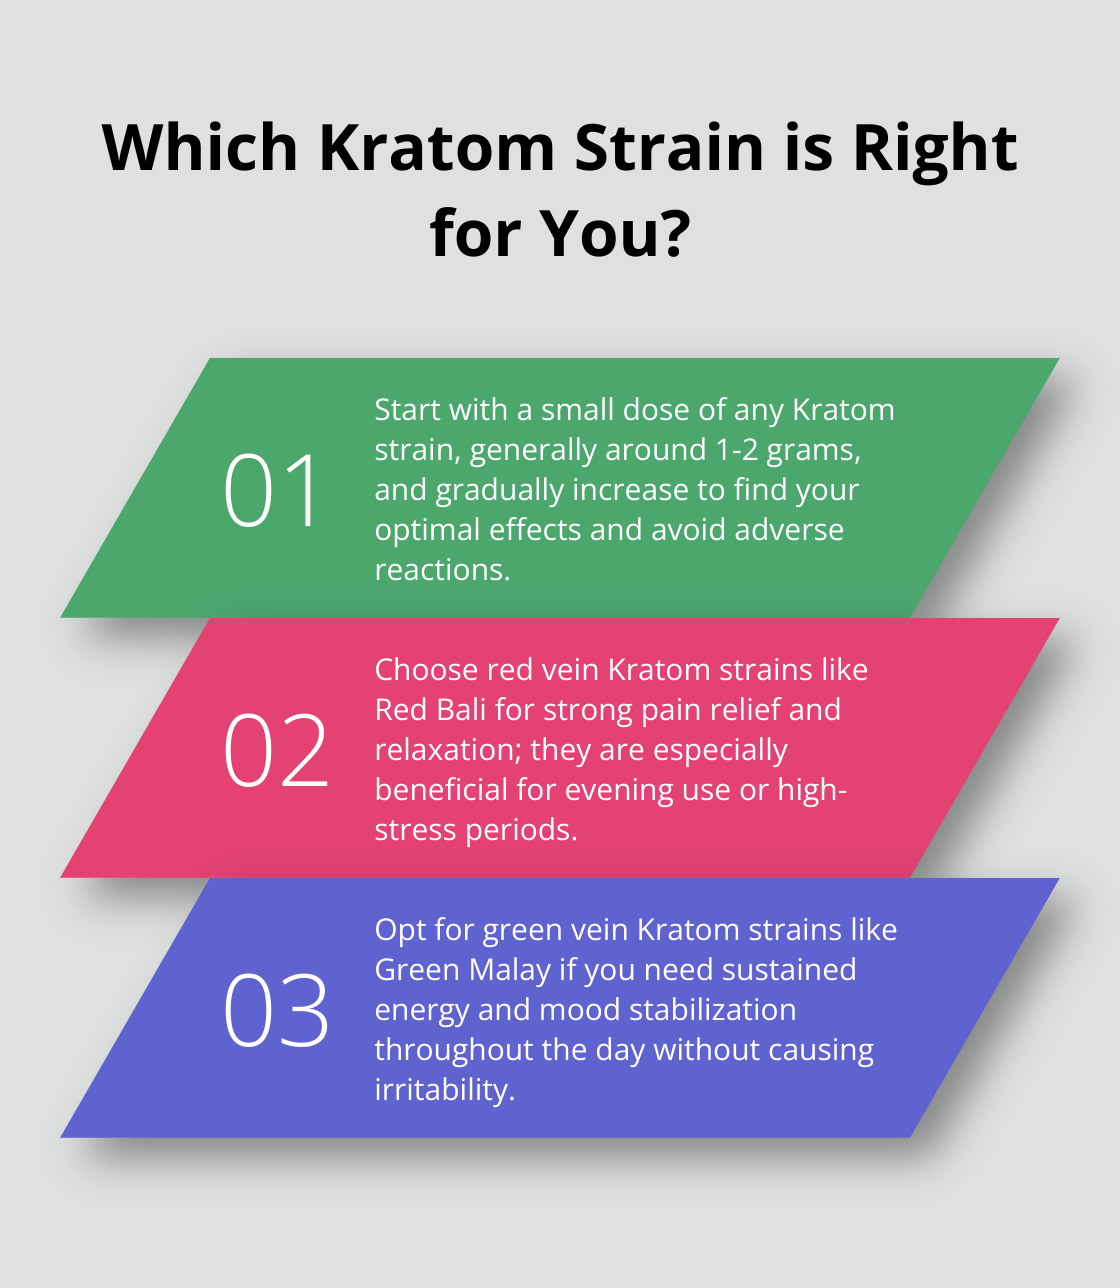 Fact - Which Kratom Strain is Right for You?